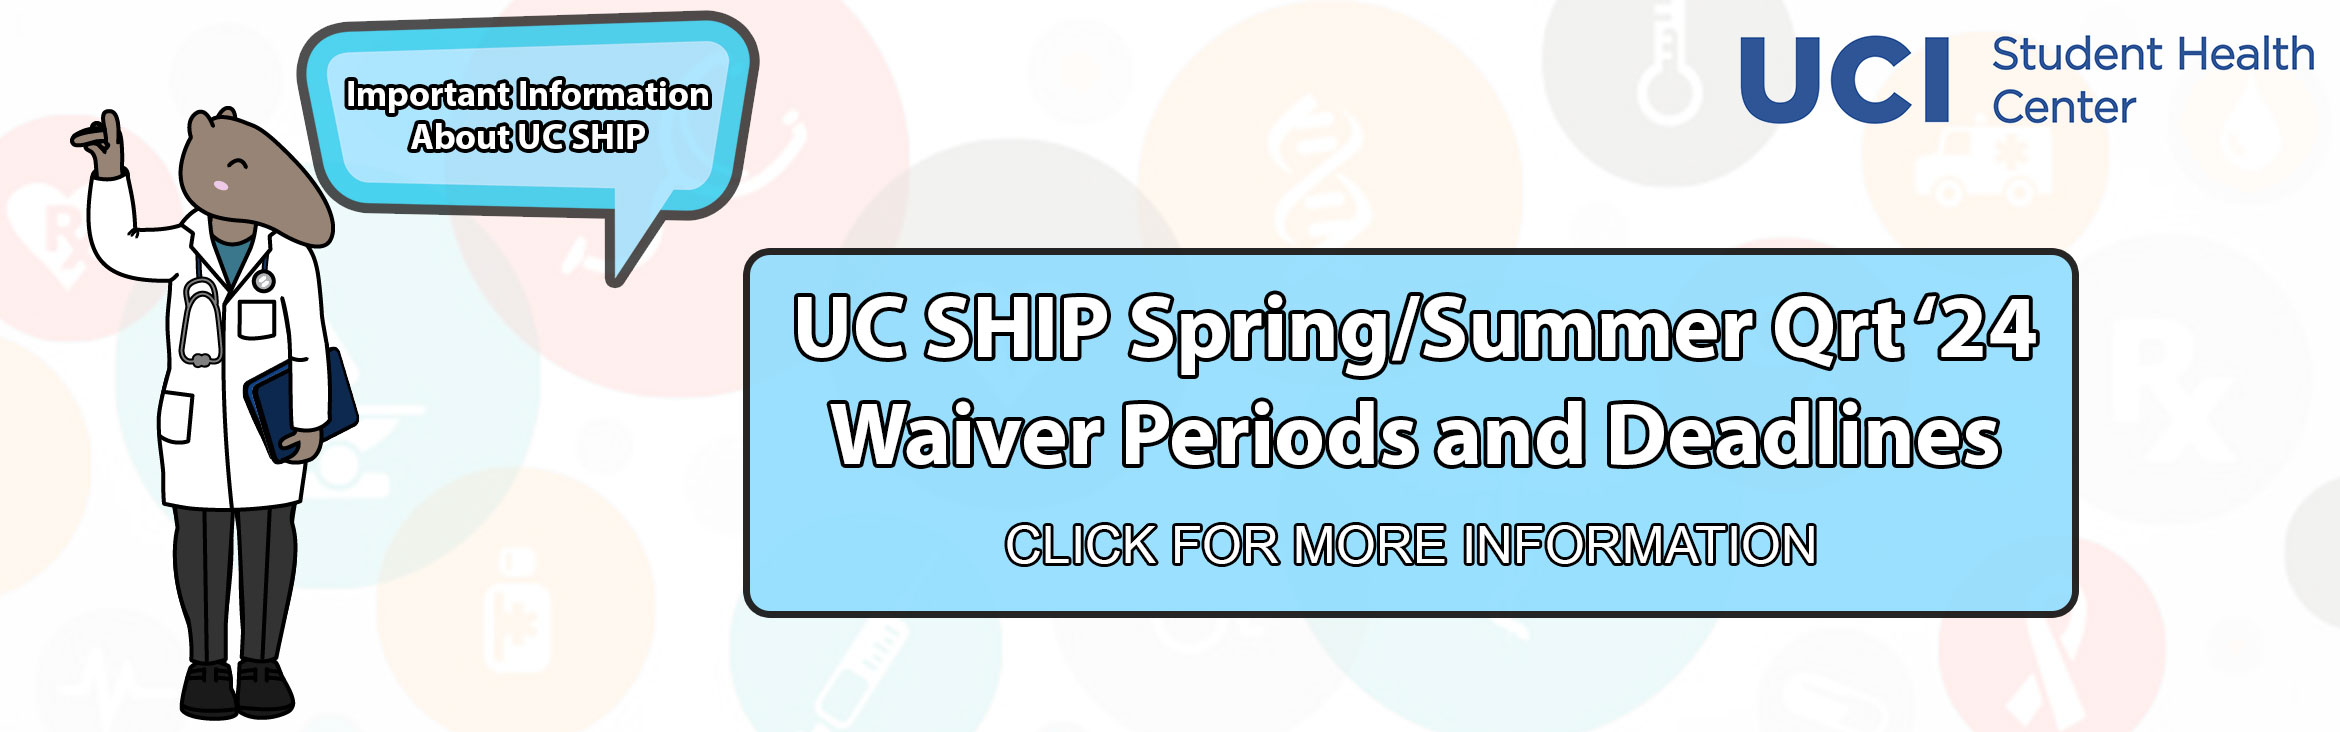 UC SHIP Spring/ Summer Qrt '24 Waiver Periods and Deadlines 